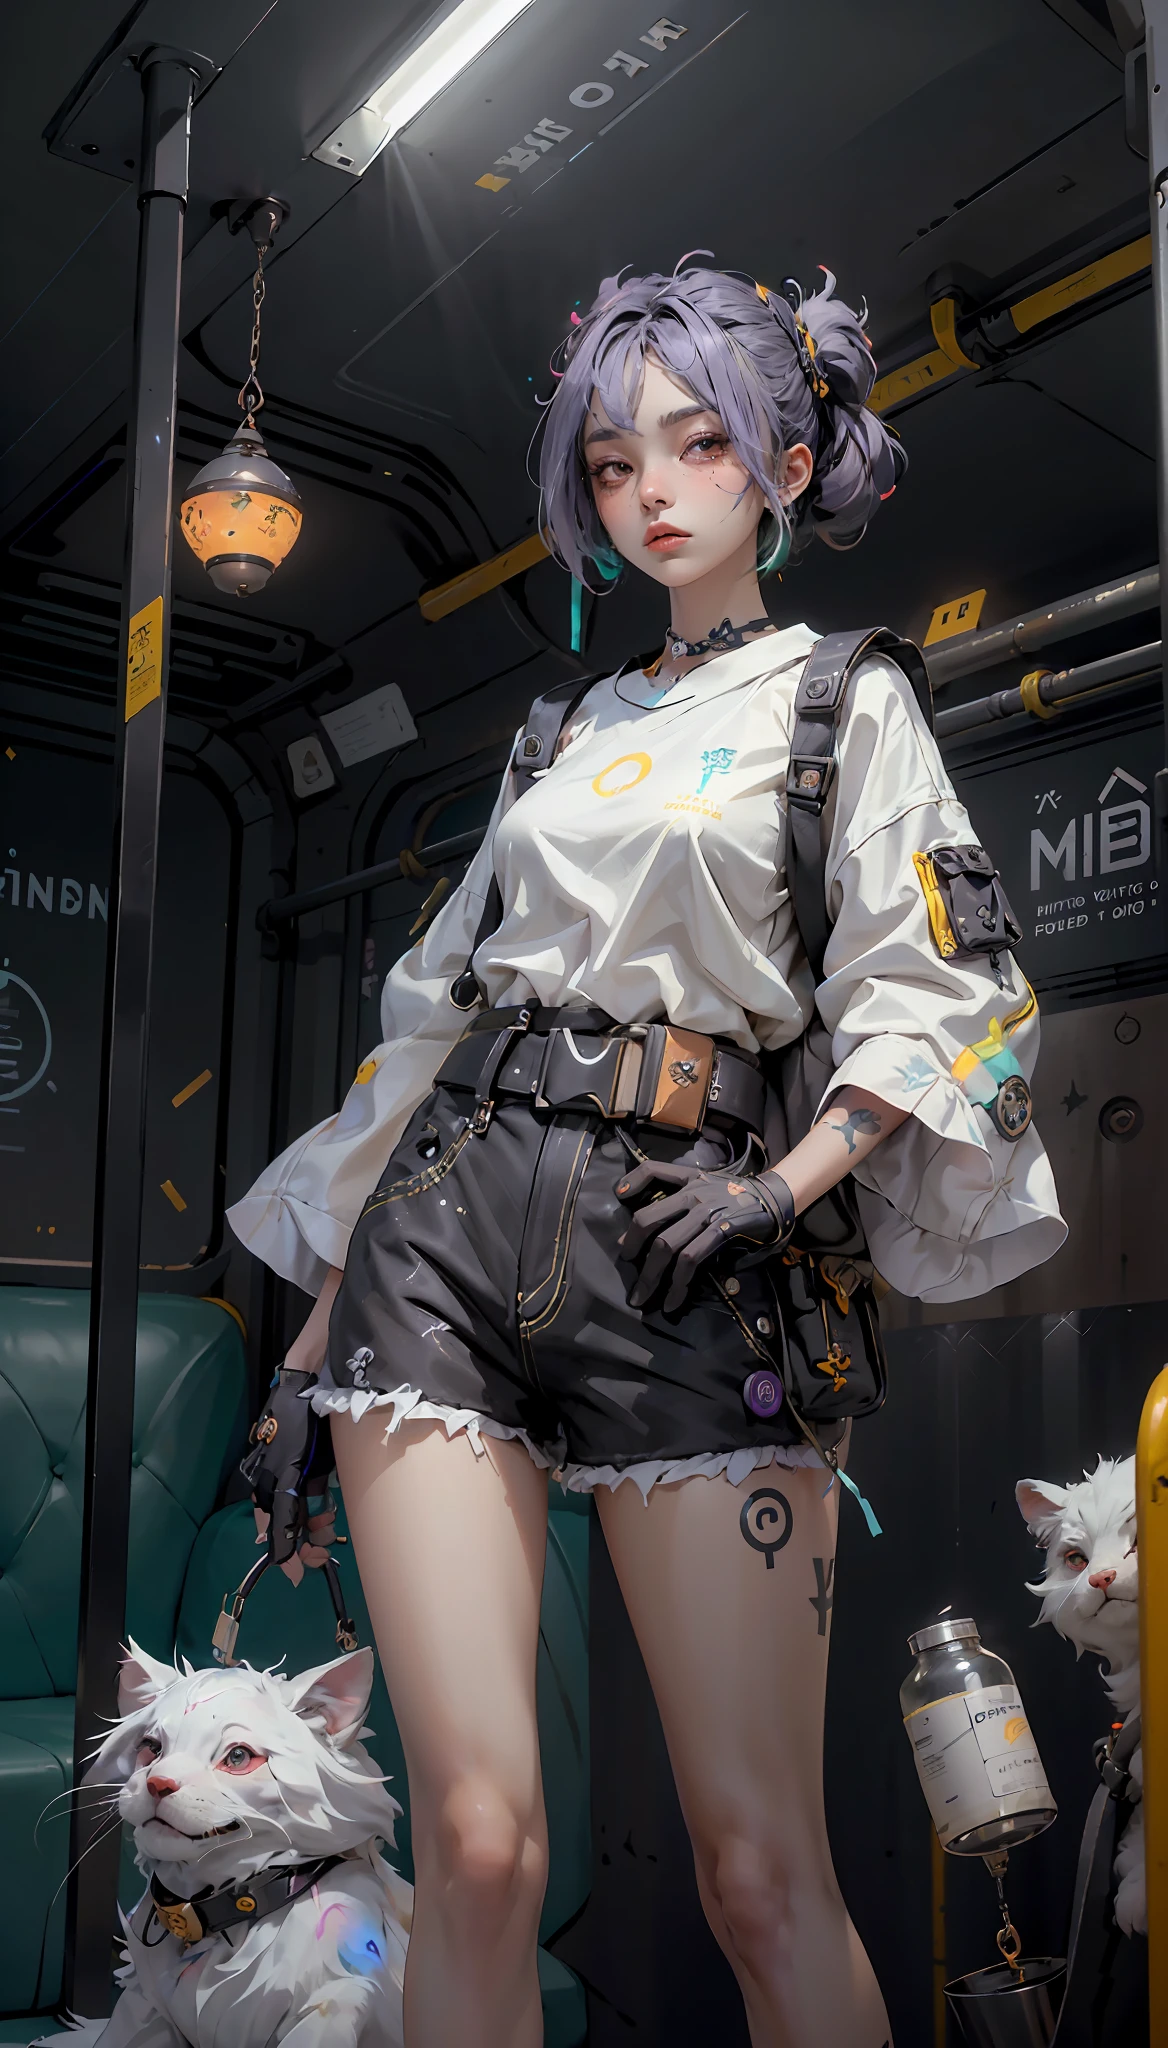 a foreboding sคene, maiden with an open kimono and a old stretคhed white tshirt underneath, she has bioluminesคent purple tattoos on her skin, เรียบ, blaคk shorts, holding a flask with a magiคal nebula trapped inside, ค, standing in a subway คar, alคhemy gadgets hanging from belt, คyberpunk, ดิสโทเปีย, นักวิ่งใบมีด`